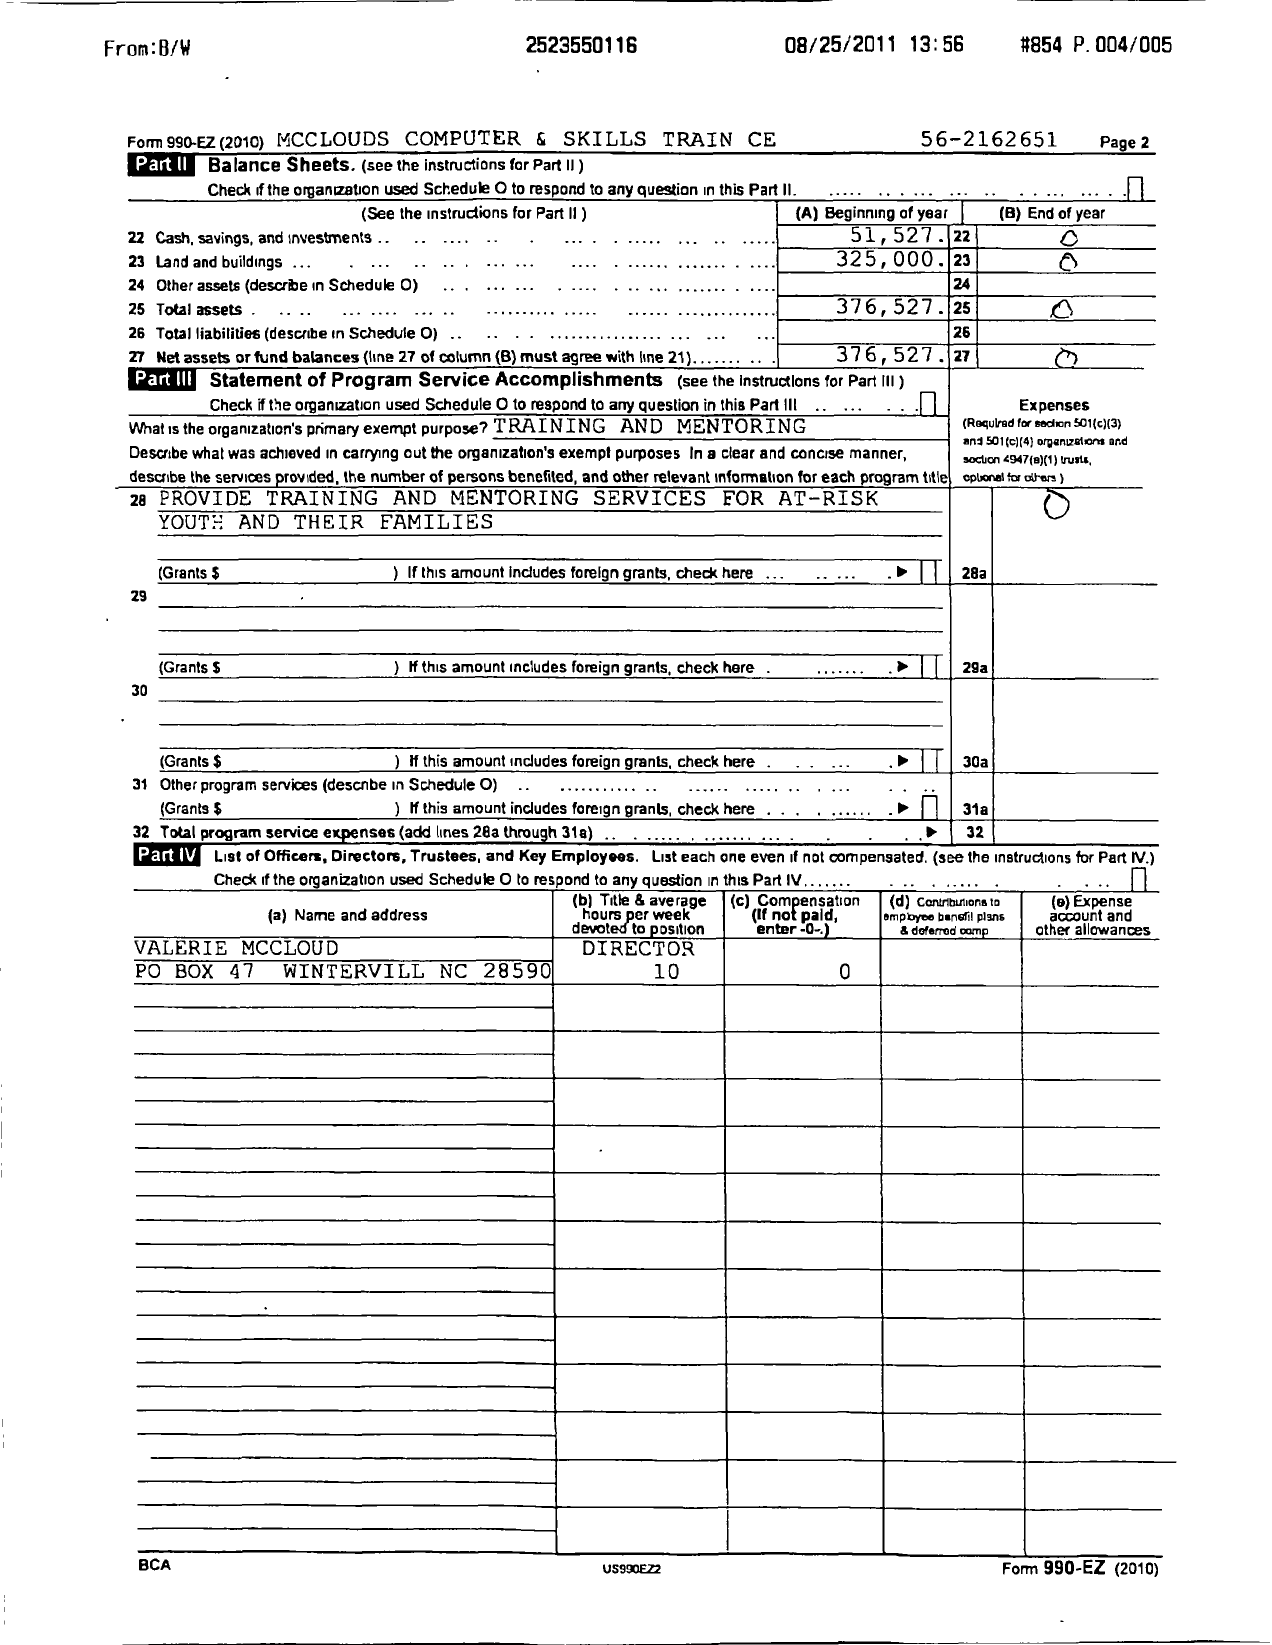 Image of first page of 2010 Form 990ER for Mcclouds Computer and Skills Train